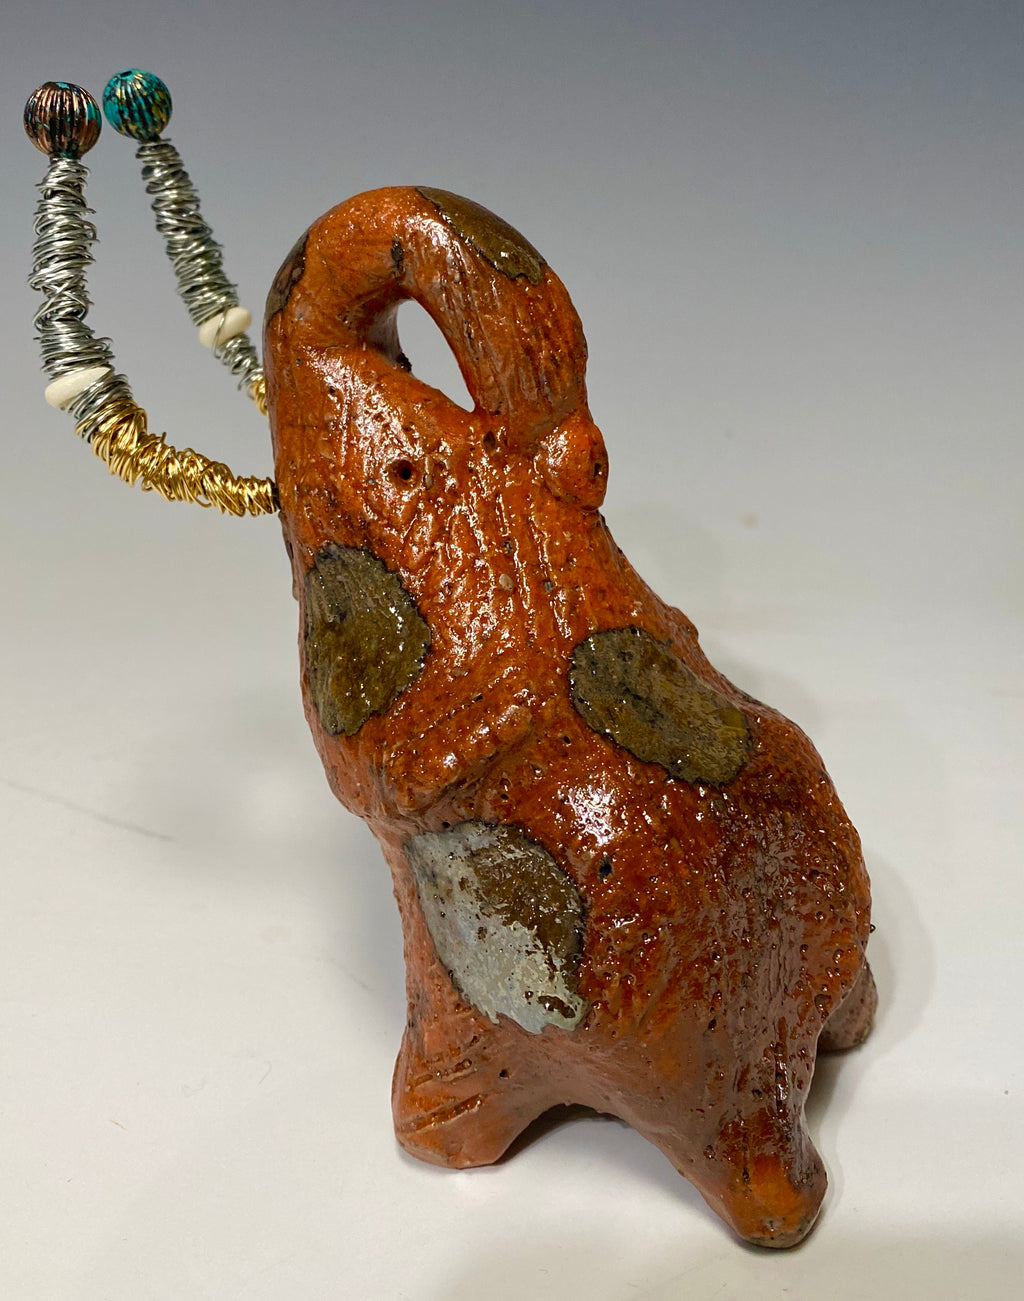 Raku Elephant Have you HERD!!!!!!  Just one of these lovely Raku Fired Elephant will make an excellent gift for your  friend, sorority or for your home’ special place centerpiece.  7" x 4" x 3" 11 ozs. Beautiful metallic gold and orange raku elephant For decorative purposely only.